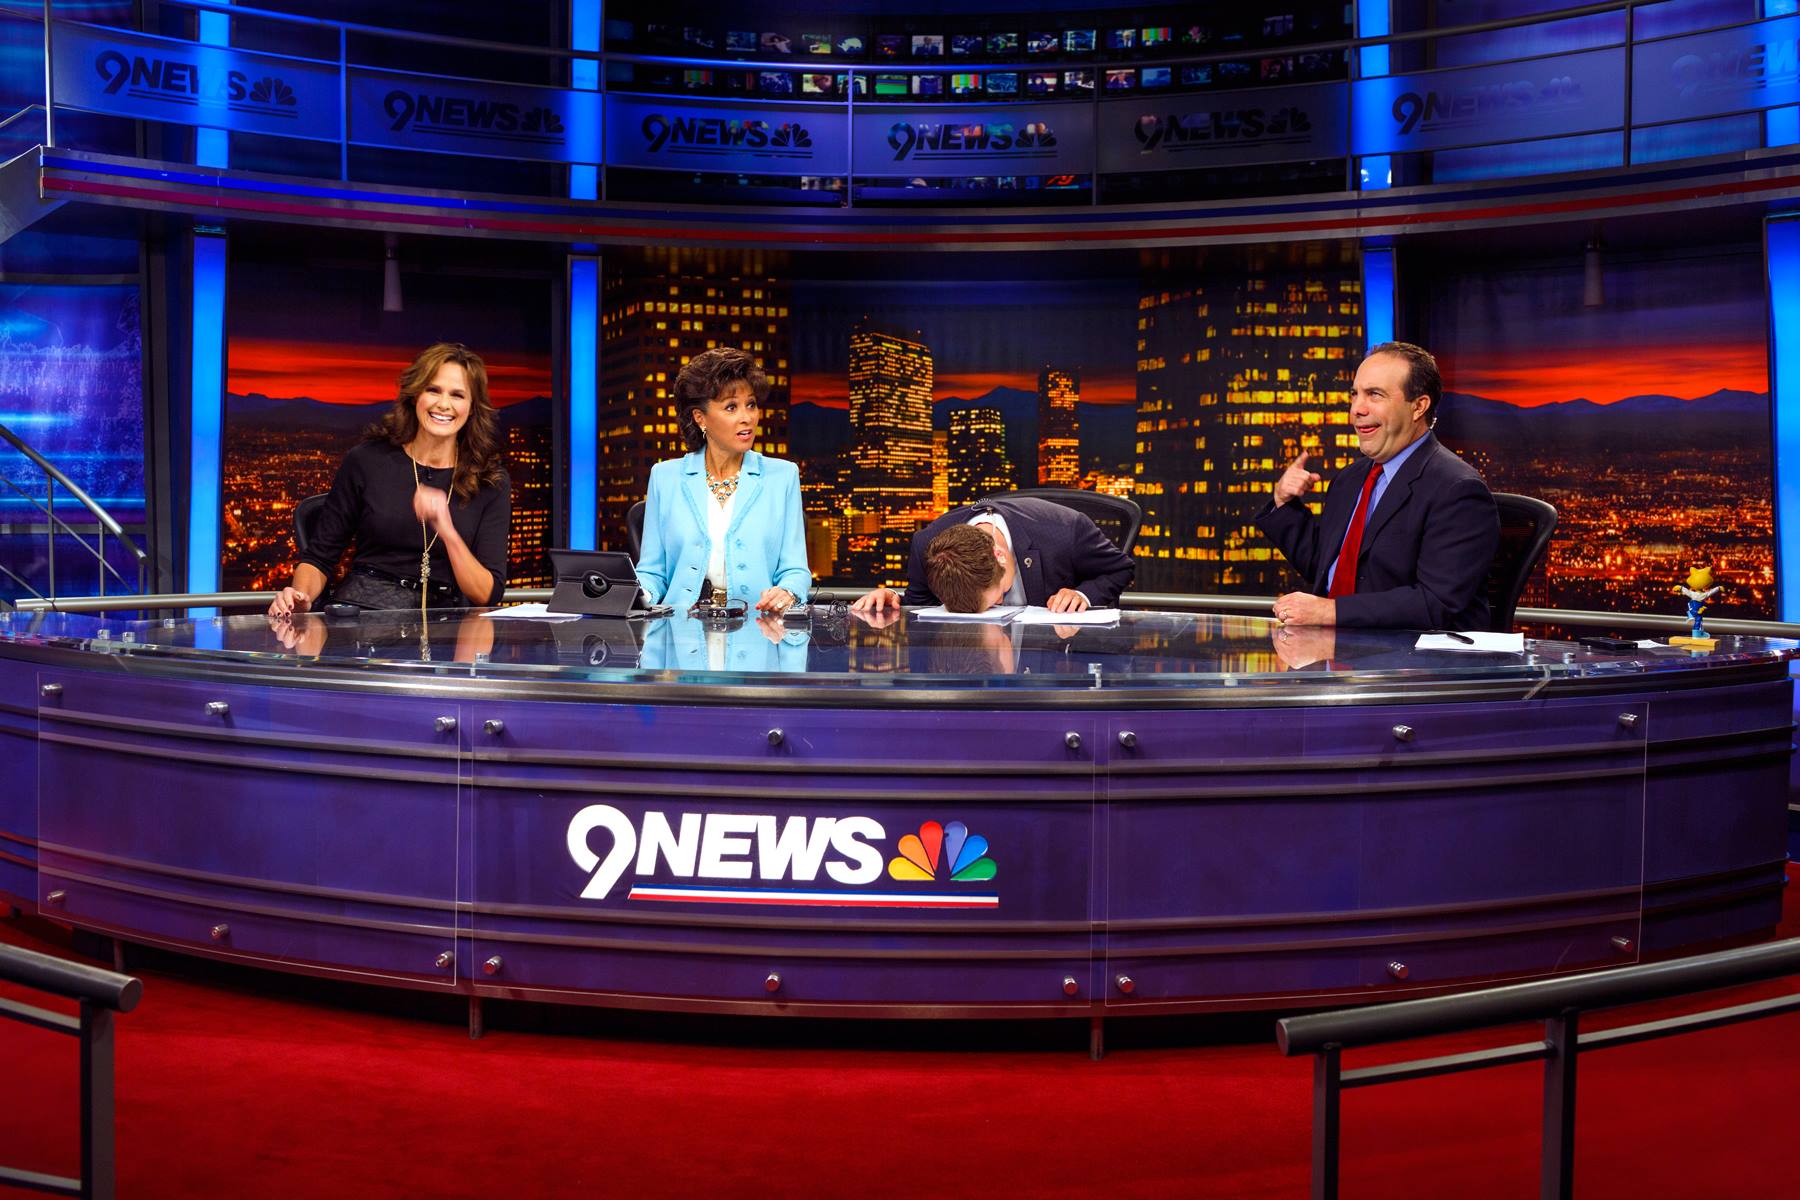 Kyle Clark (face-down) is the host of “Next with Kyle Clark,” a personality-driven reinvention of the 6 p.m. news broadcast on Denver’s KUSA 9News